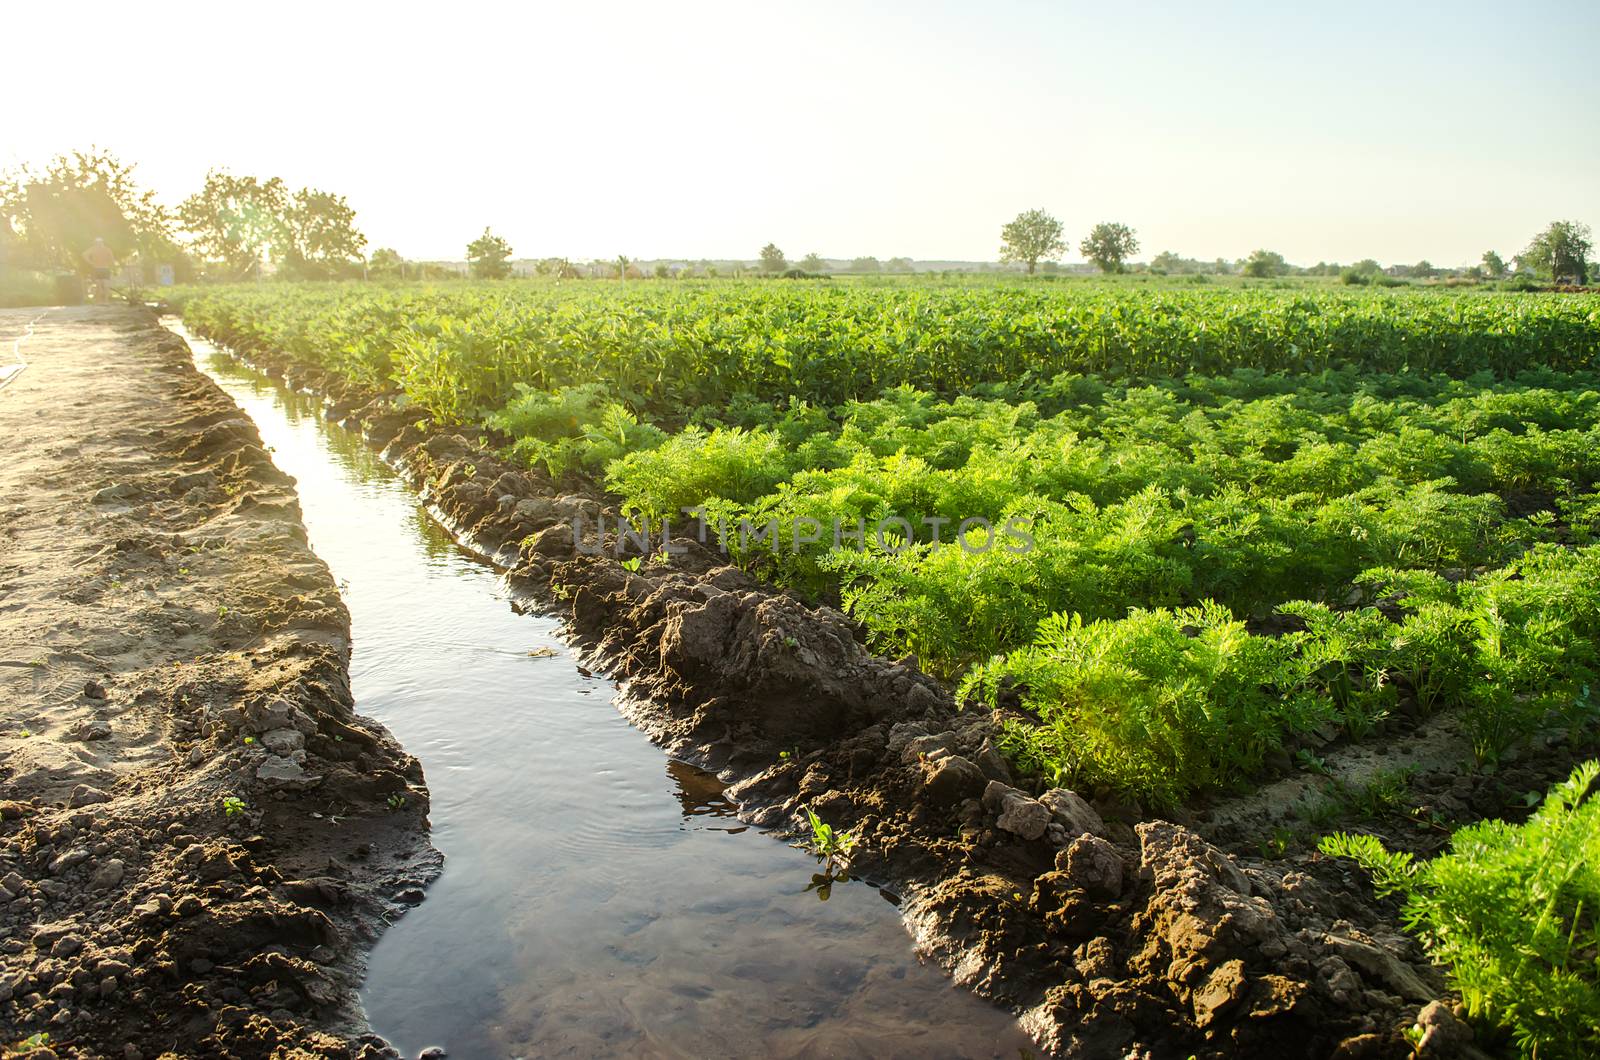 Watering the plantation of young potatoes and carrots through irrigation canals. Agronomy. Rural countryside. European farm, farming. Caring for plants, growing food. Agriculture and agribusiness. by iLixe48